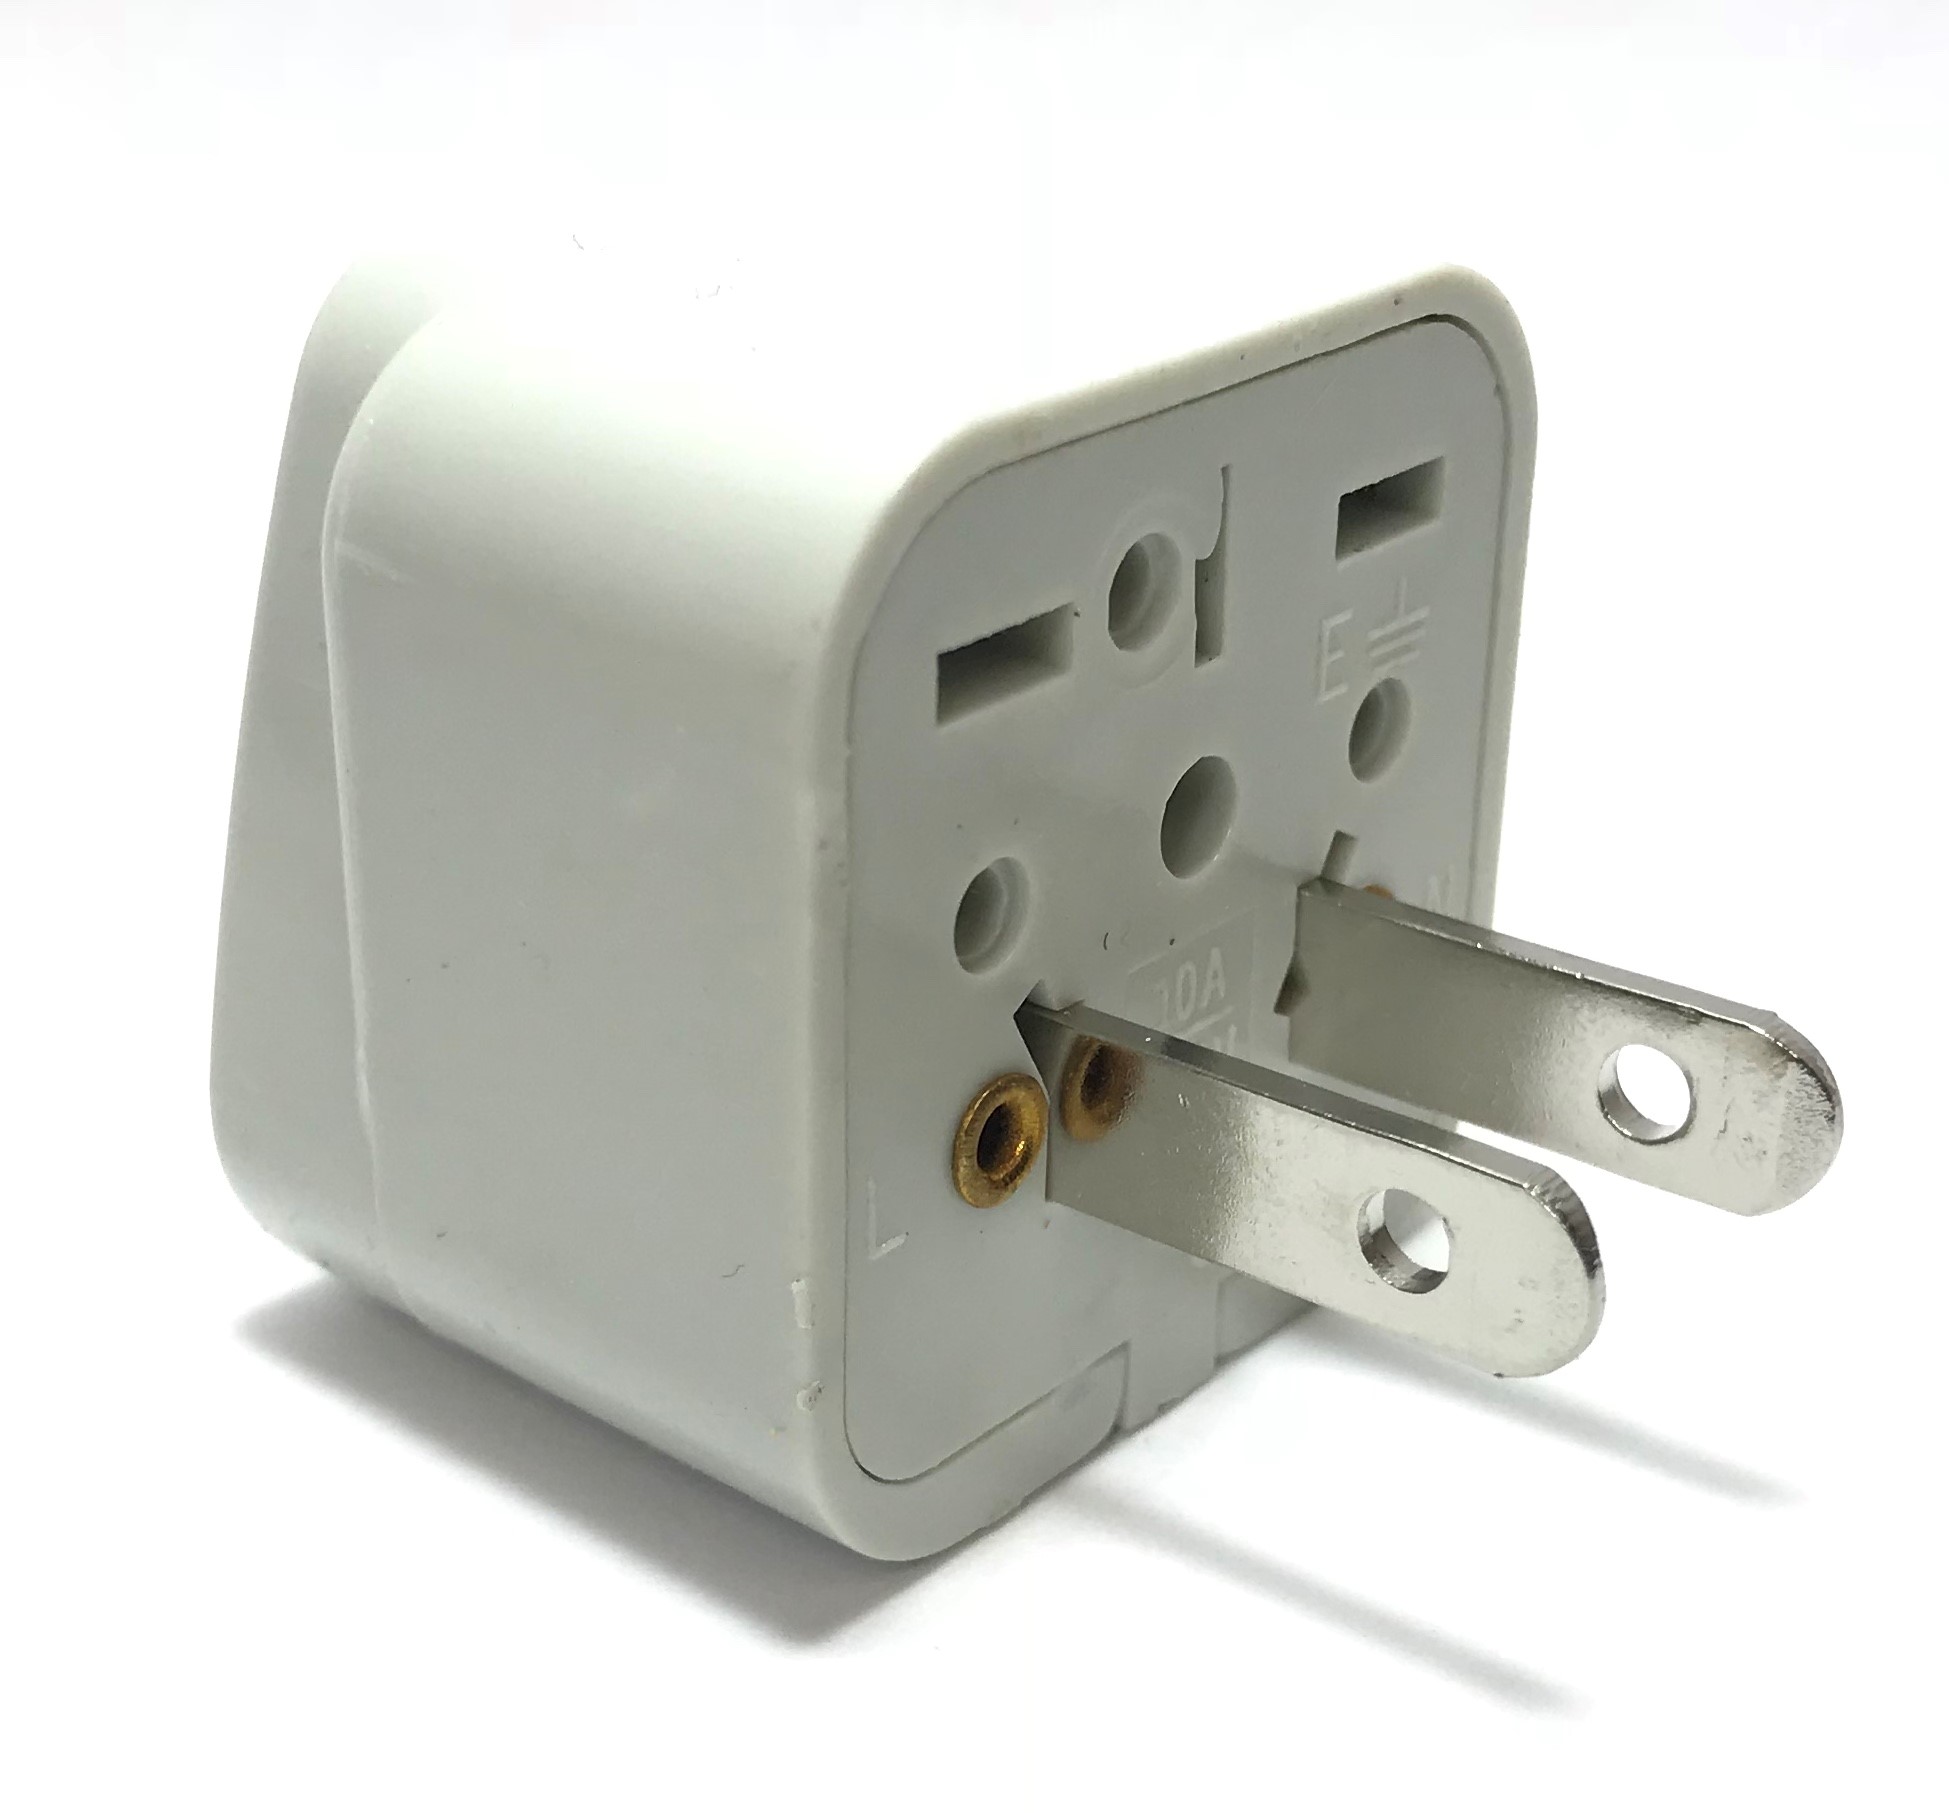 Seven Star SS-410 Universal Plug Adapter for Standard USA Outlet American plug adaptor,US adapter plug,adapter,plug socket,universal plug,adapters,US,USA,europe,asia,africa,india,uk,universal adapters,220 plug,220v adapter,220 volt adapter,220 adaptor